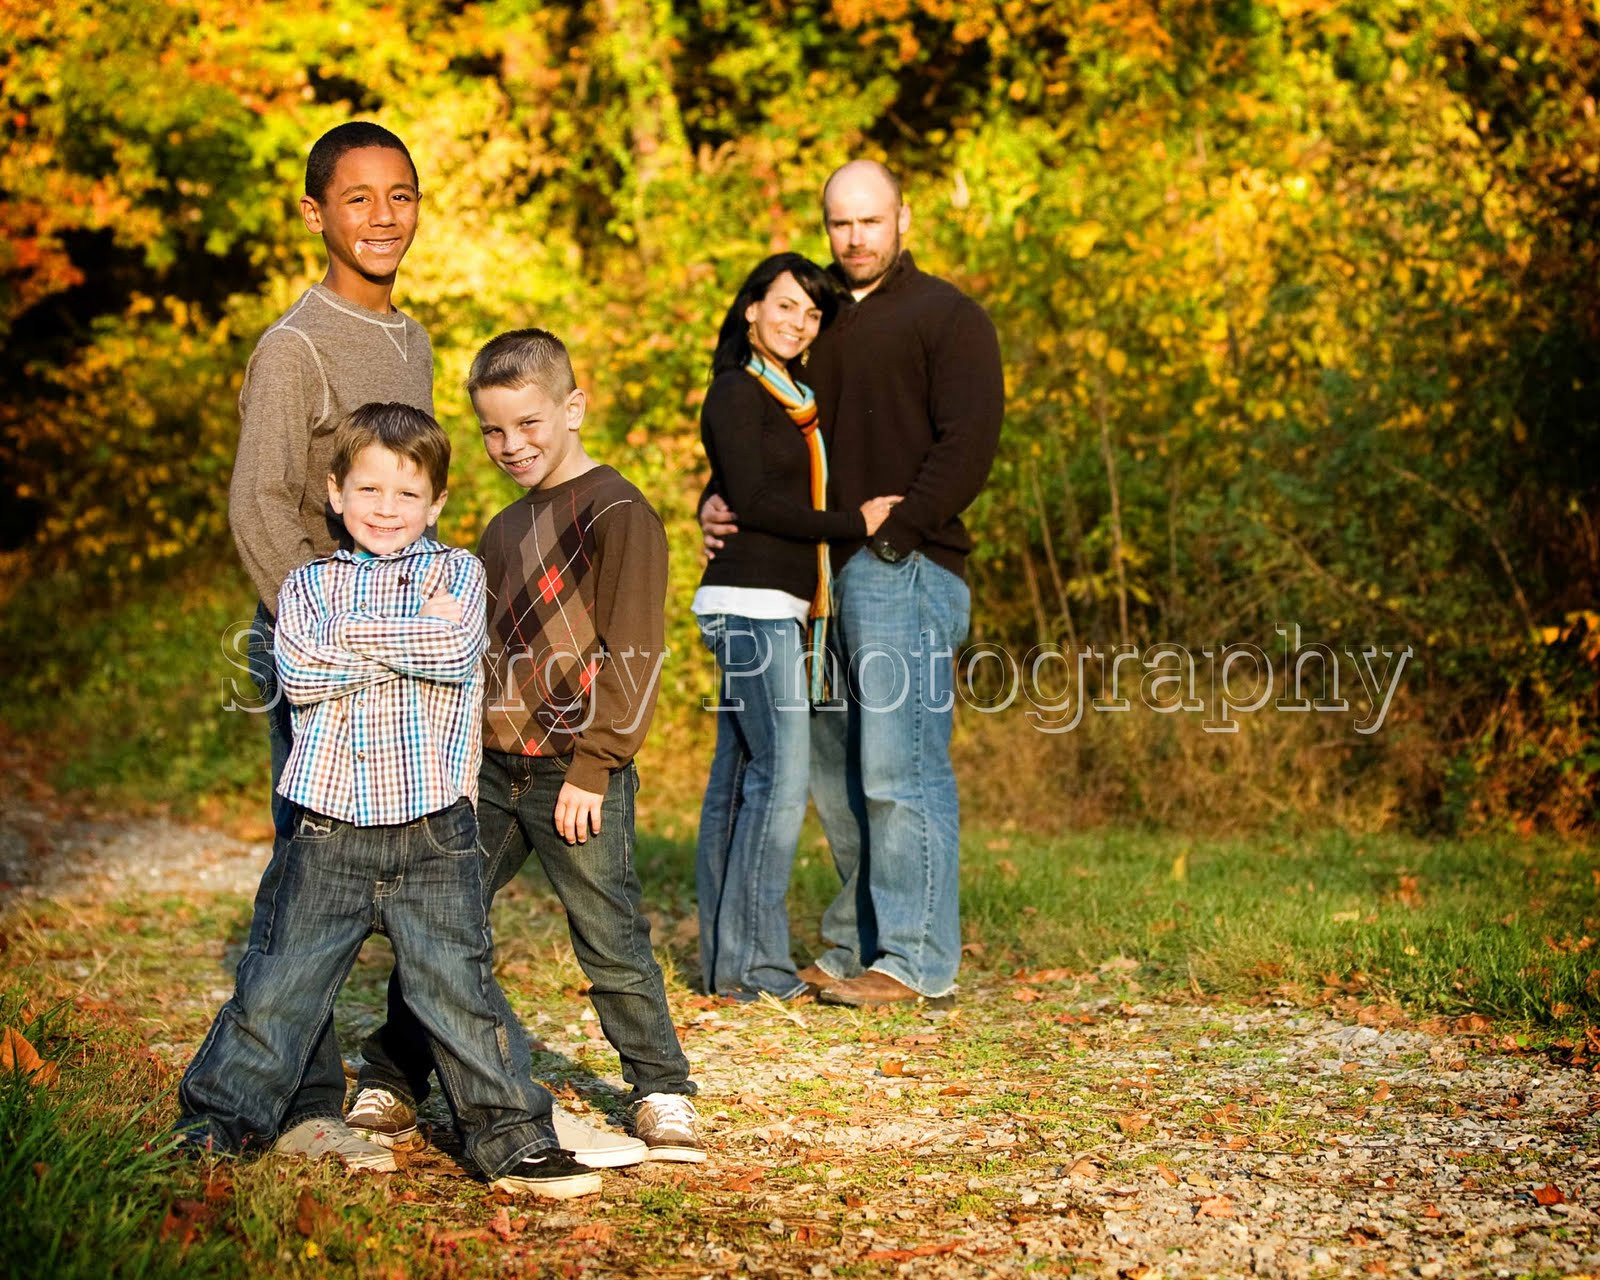 Family Portraits Ideas For Fall
 In True Color Fall Family Portraits